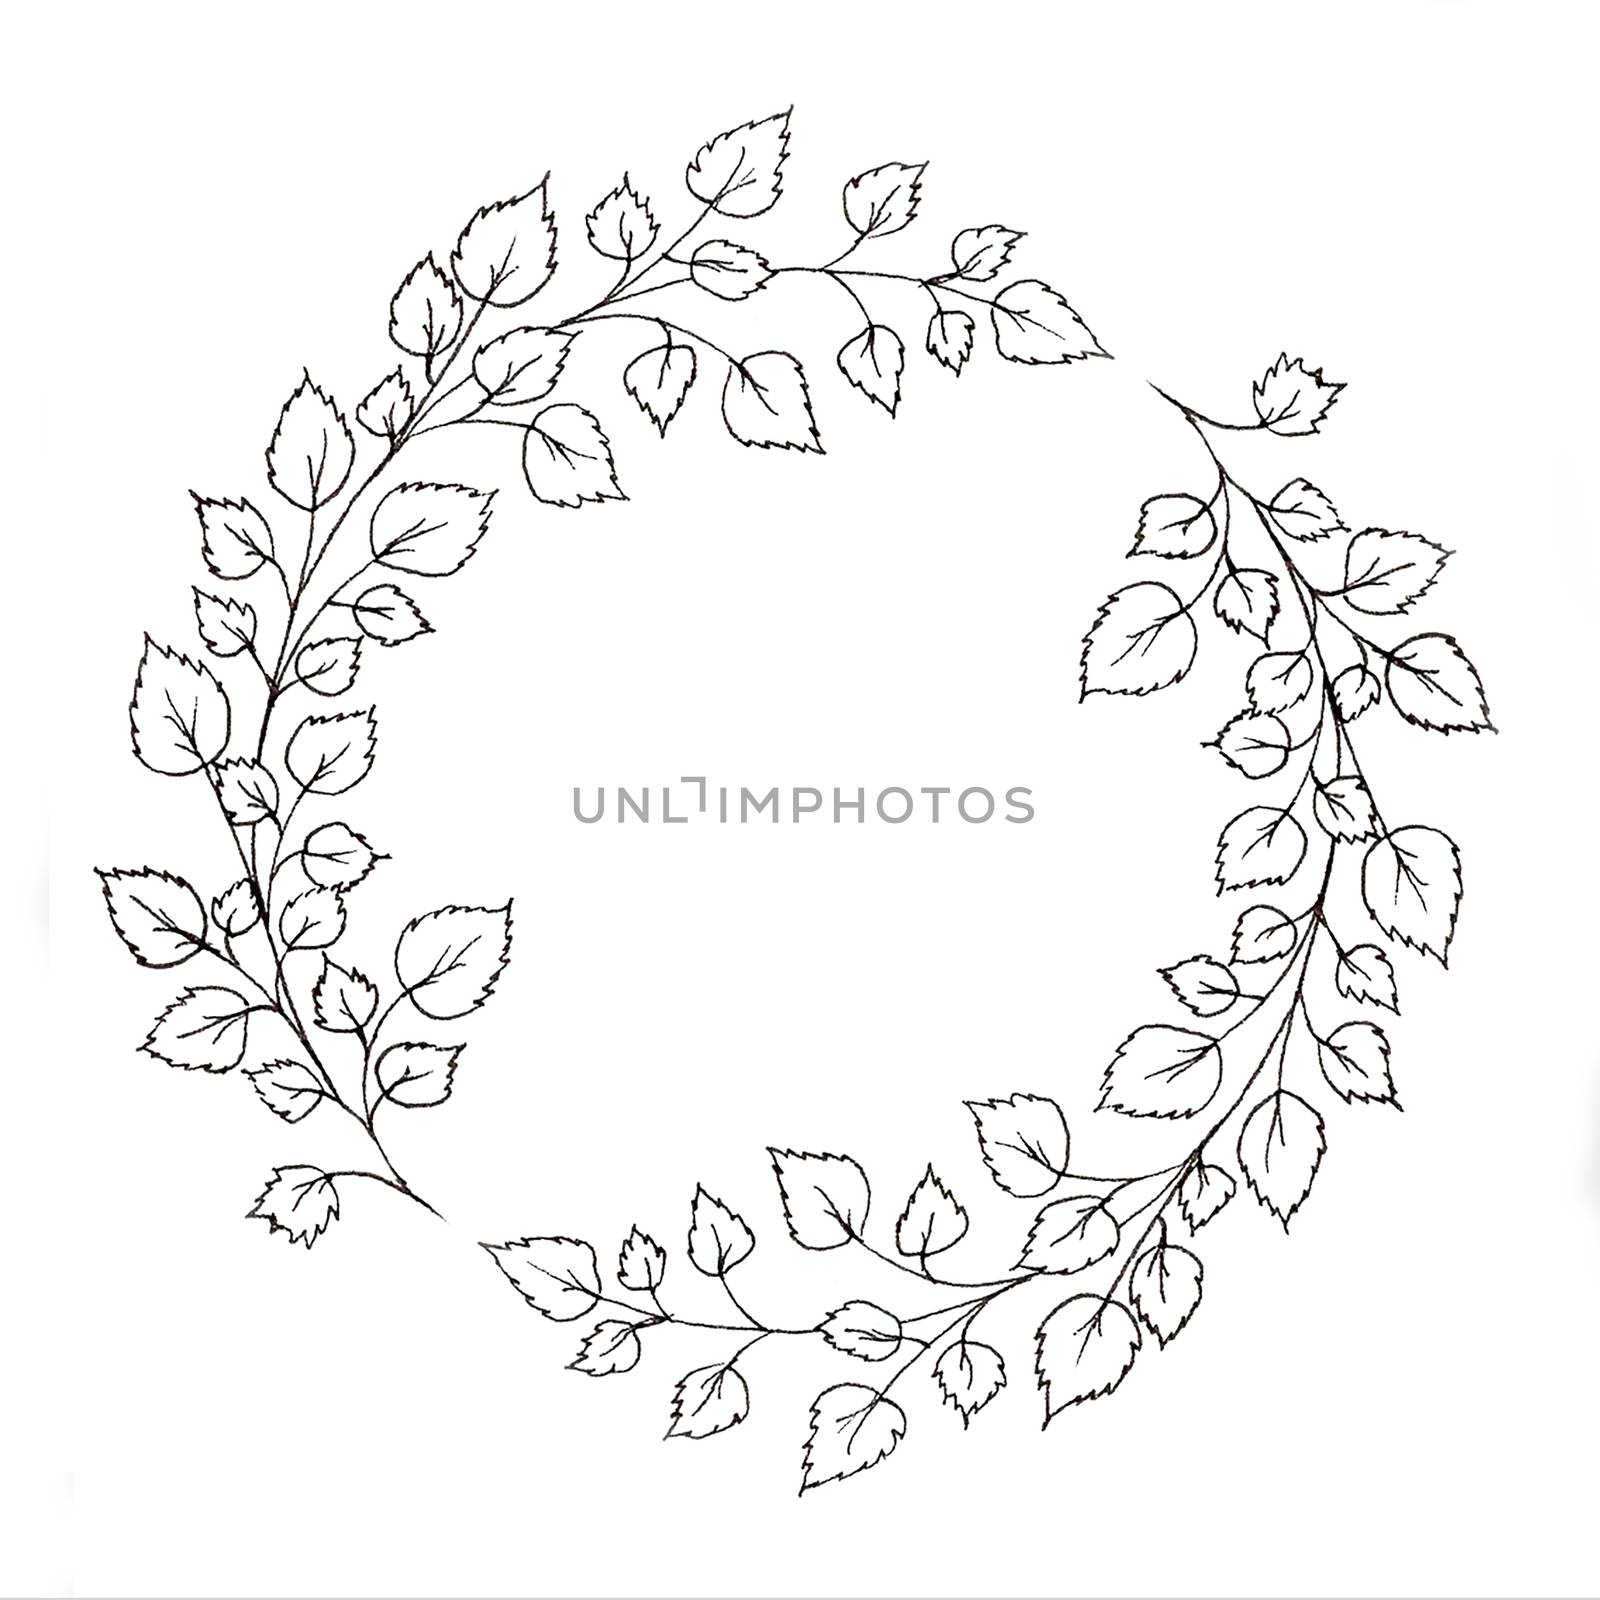 Wreath with leaves and branches. Used for wedding invitation, greeting cards